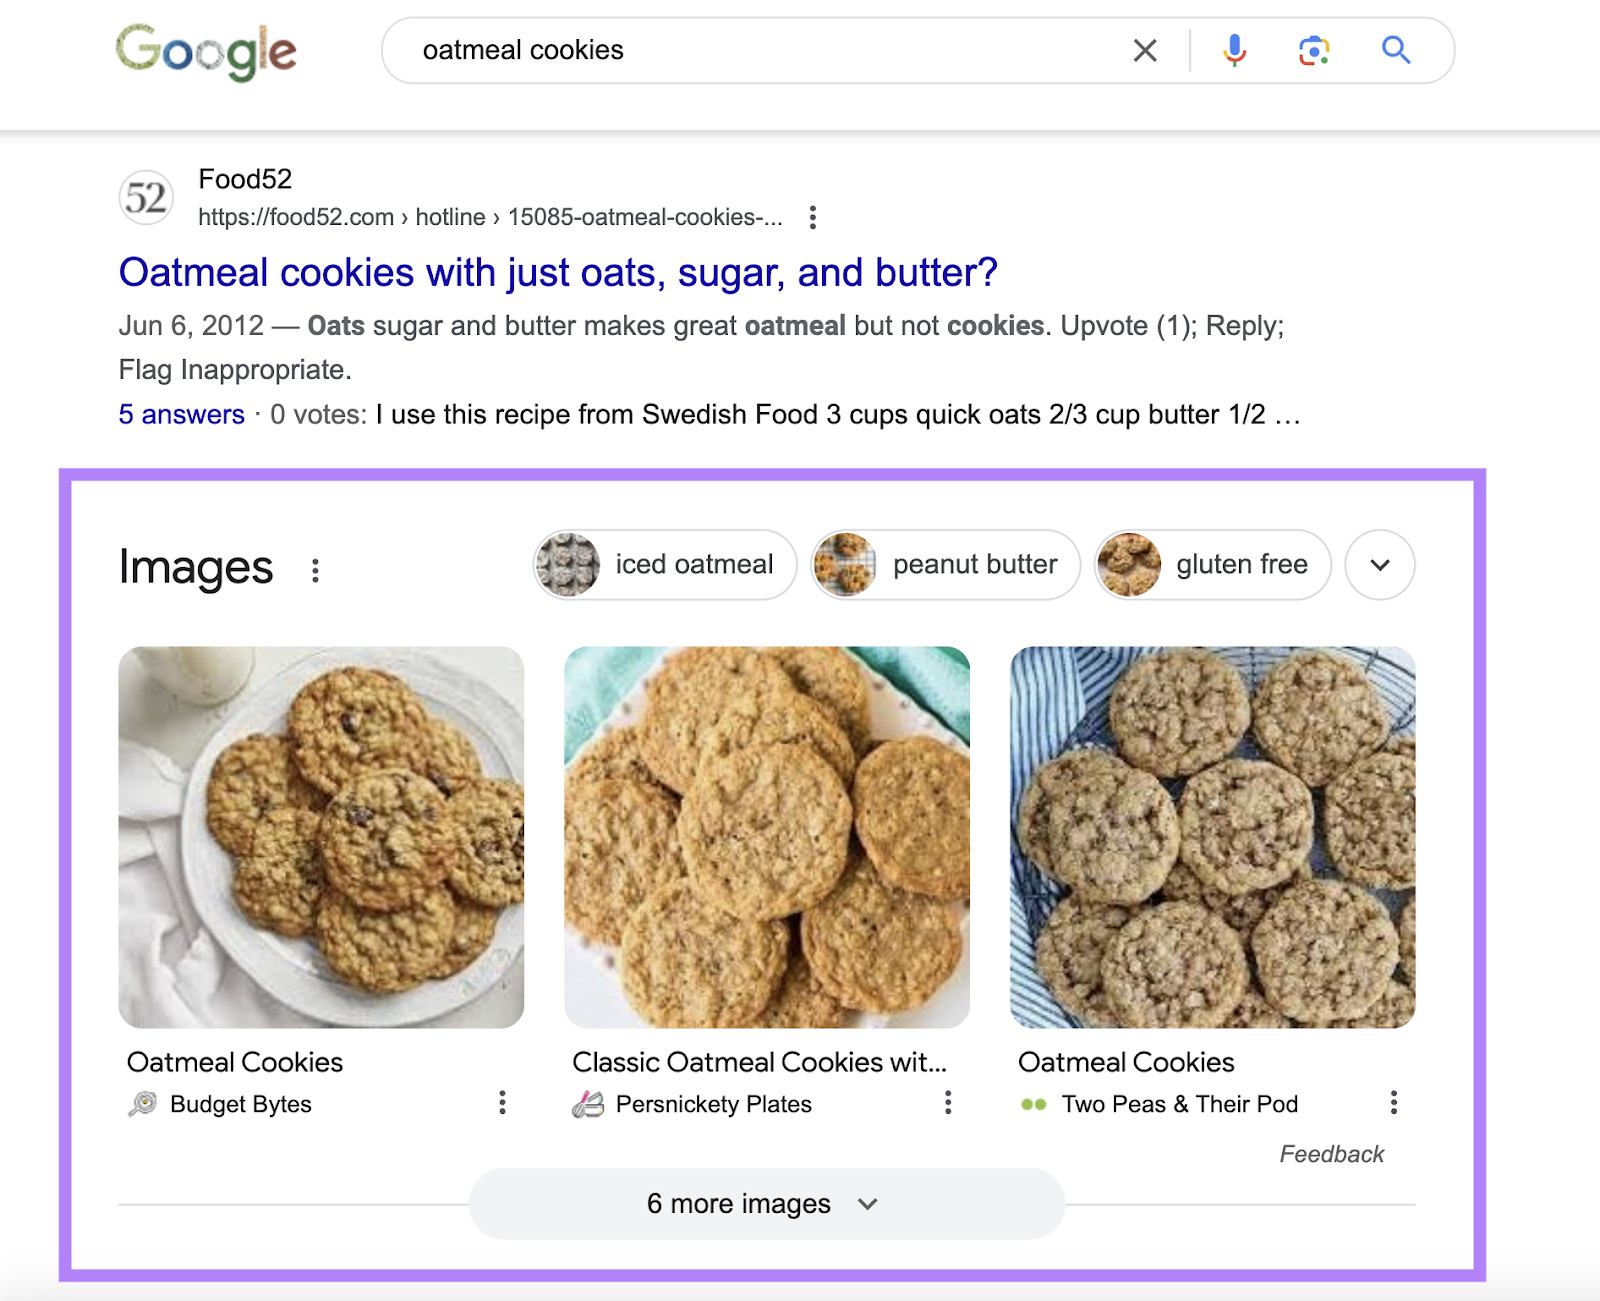 Google image pack for oatmeal cookies shows images pulled from recipes.